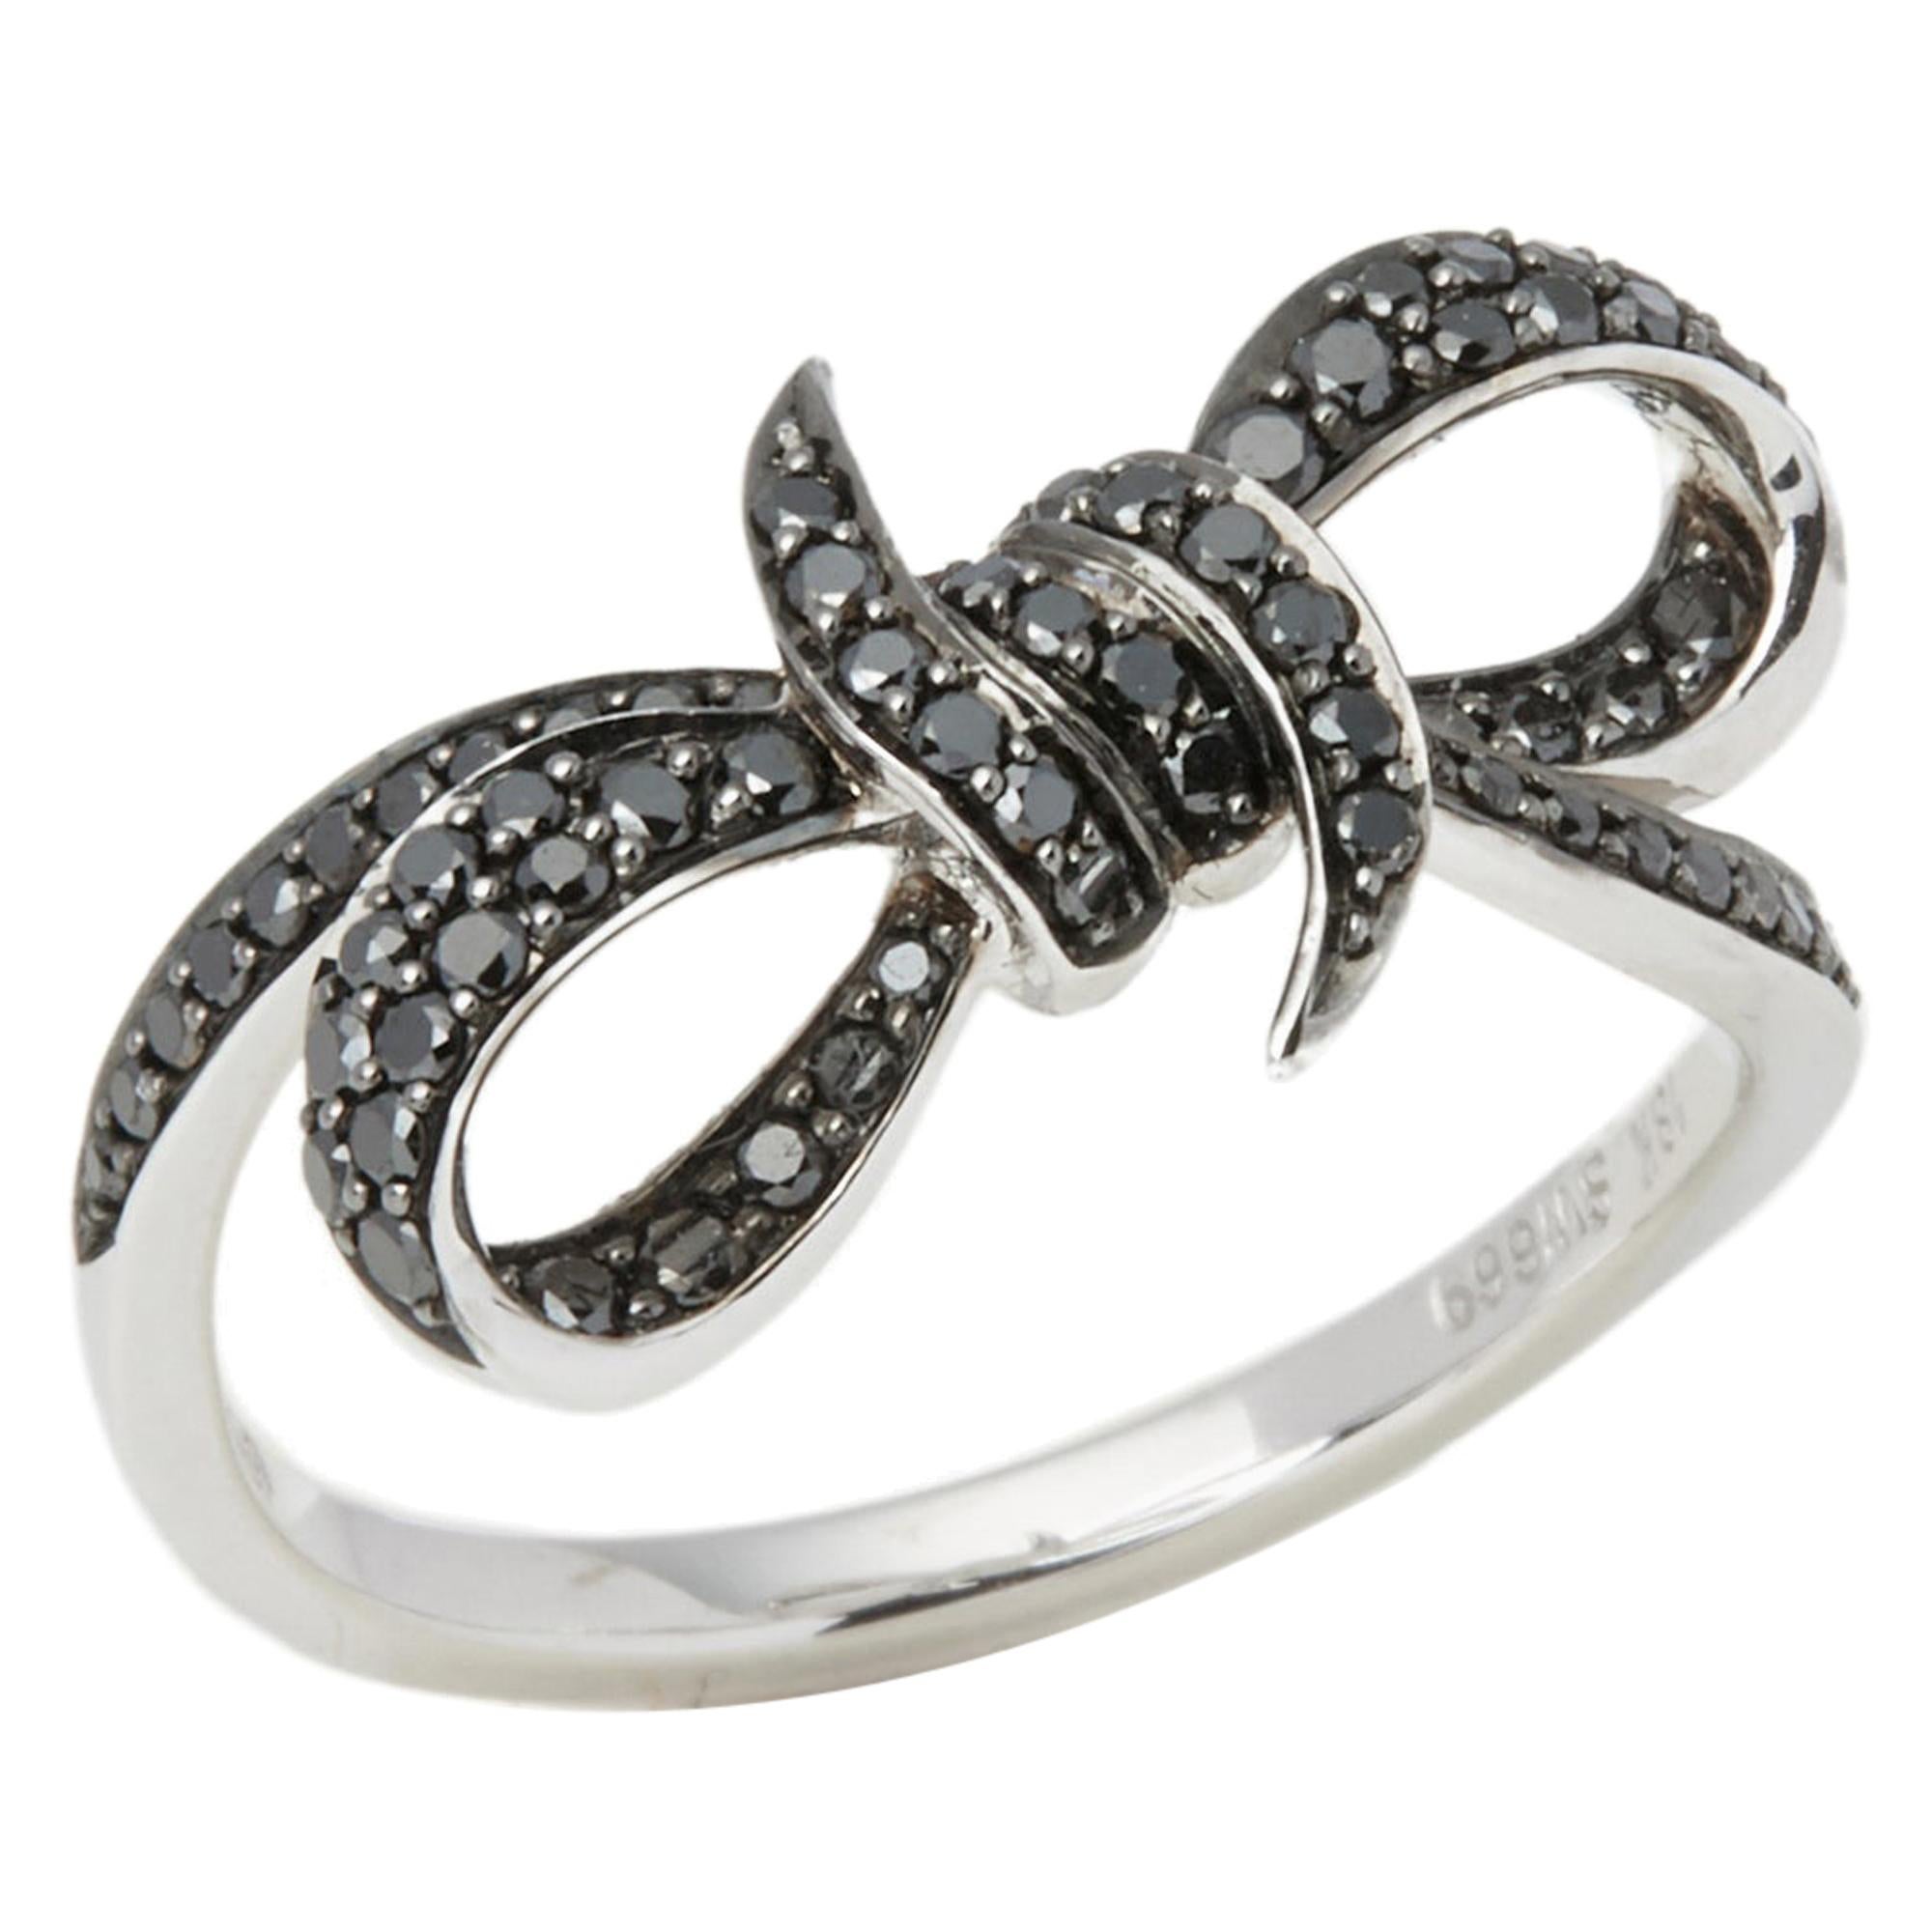 Stephen Webster Forget Me Knot 18ct White Gold Black Diamond Small Bow Ring 